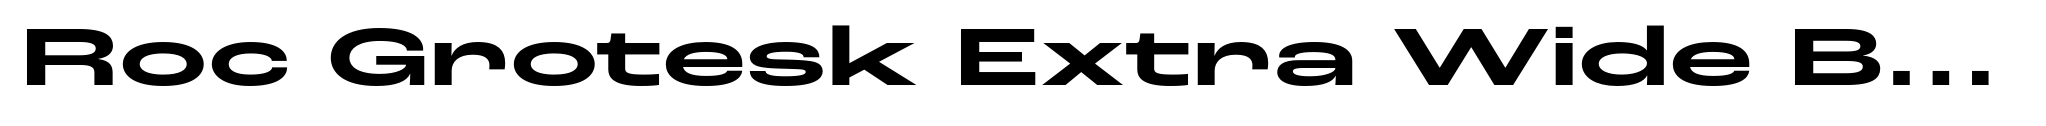 Roc Grotesk Extra Wide Bold image